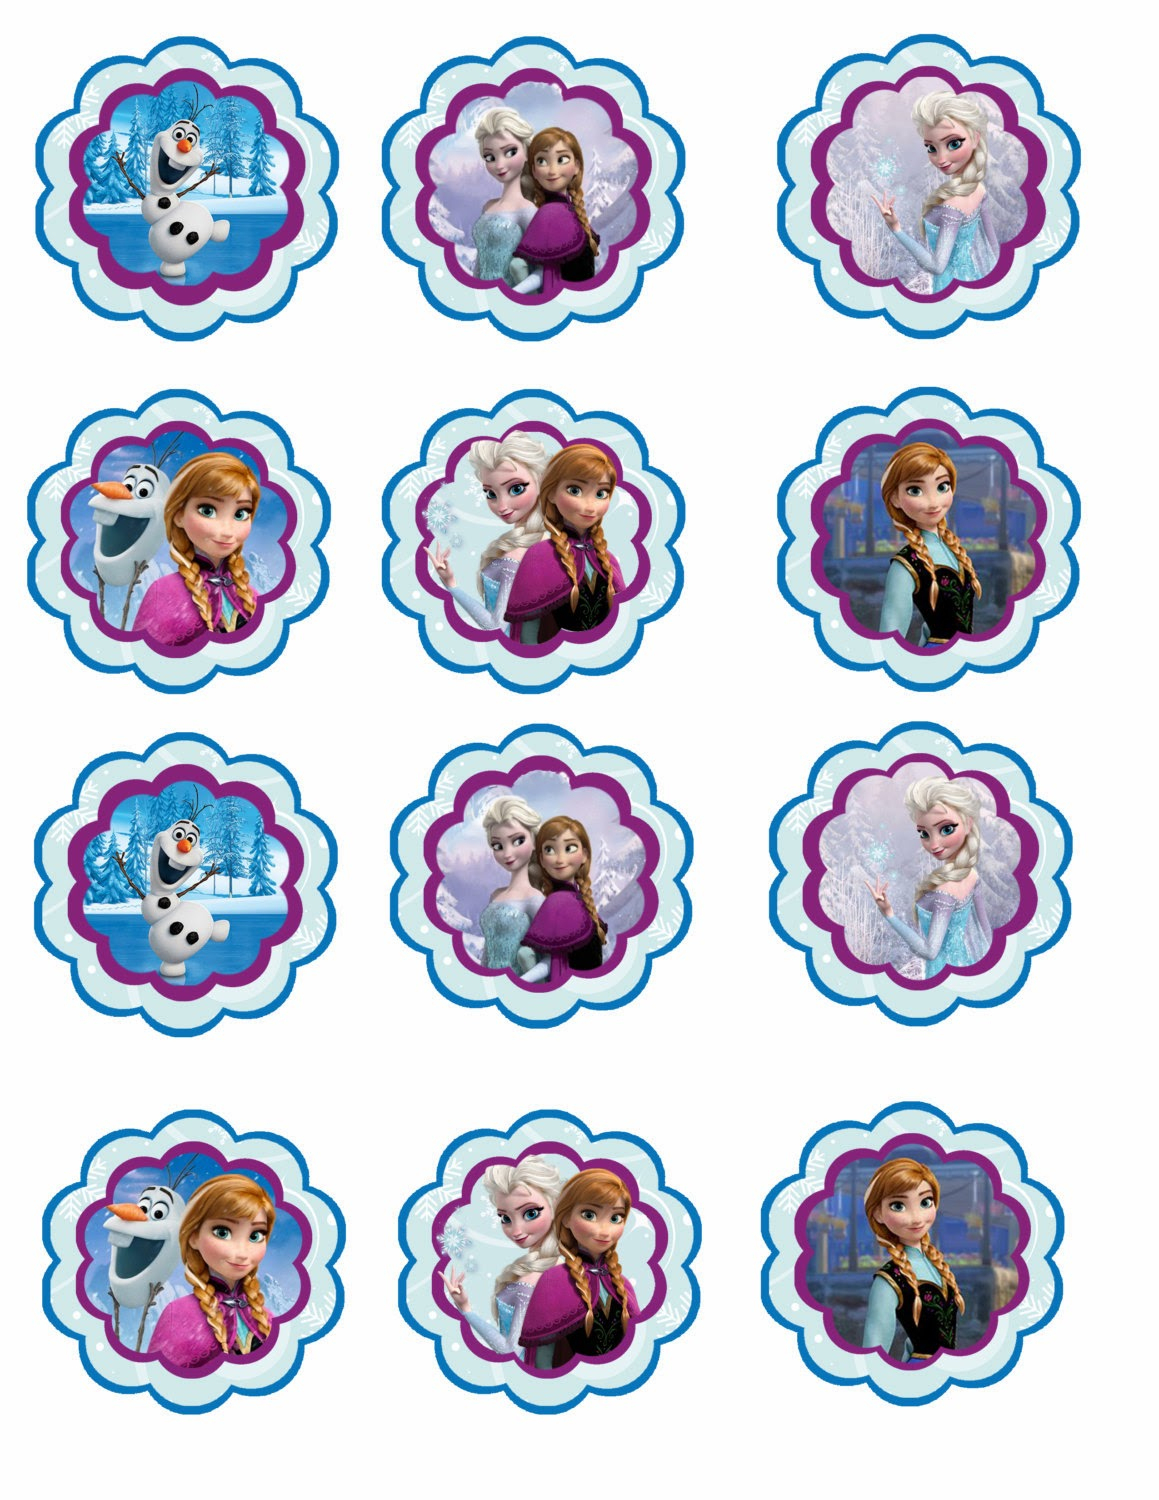 Frozen: Free Printable Toppers. | Oh My Fiesta! In English - Free Printable Mermaid Cupcake Toppers